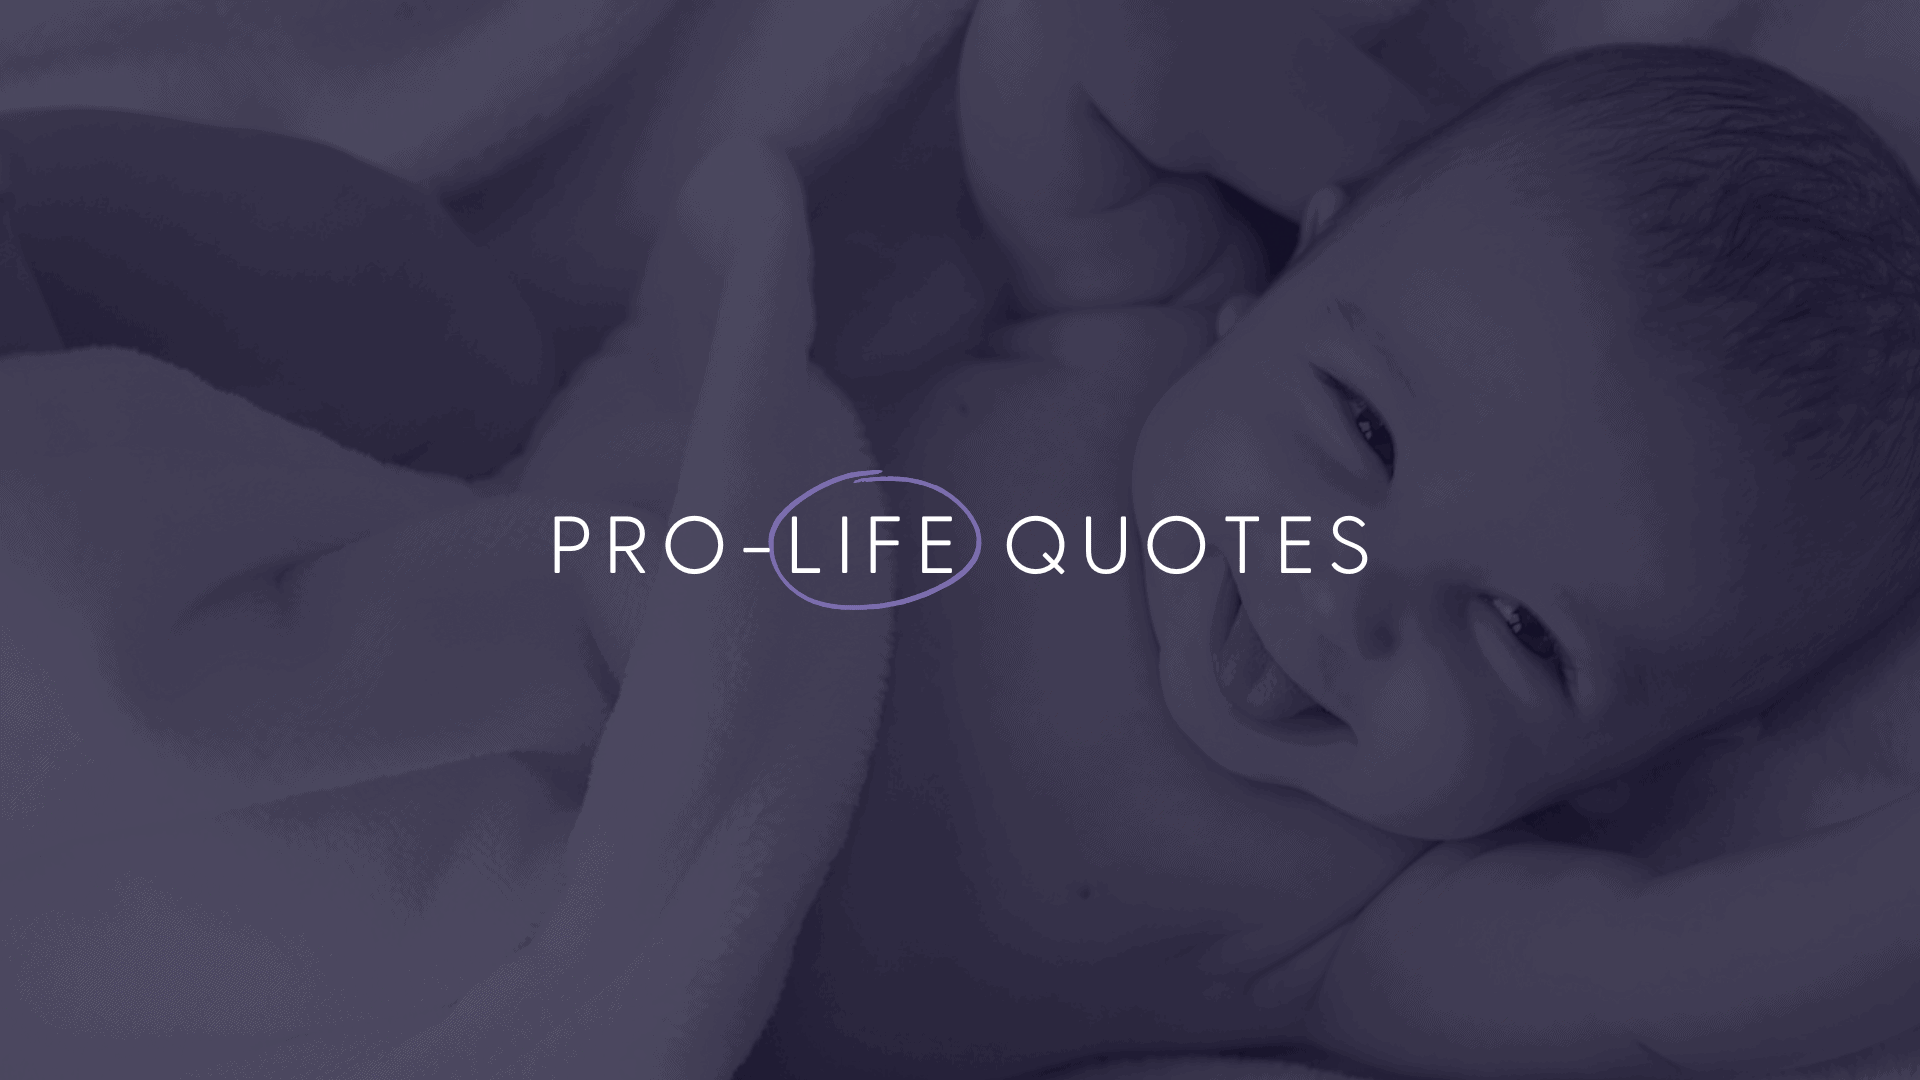 A faded background image of a baby laughing with their parent. In white clearer text it says: "Pro-Life Quotes"